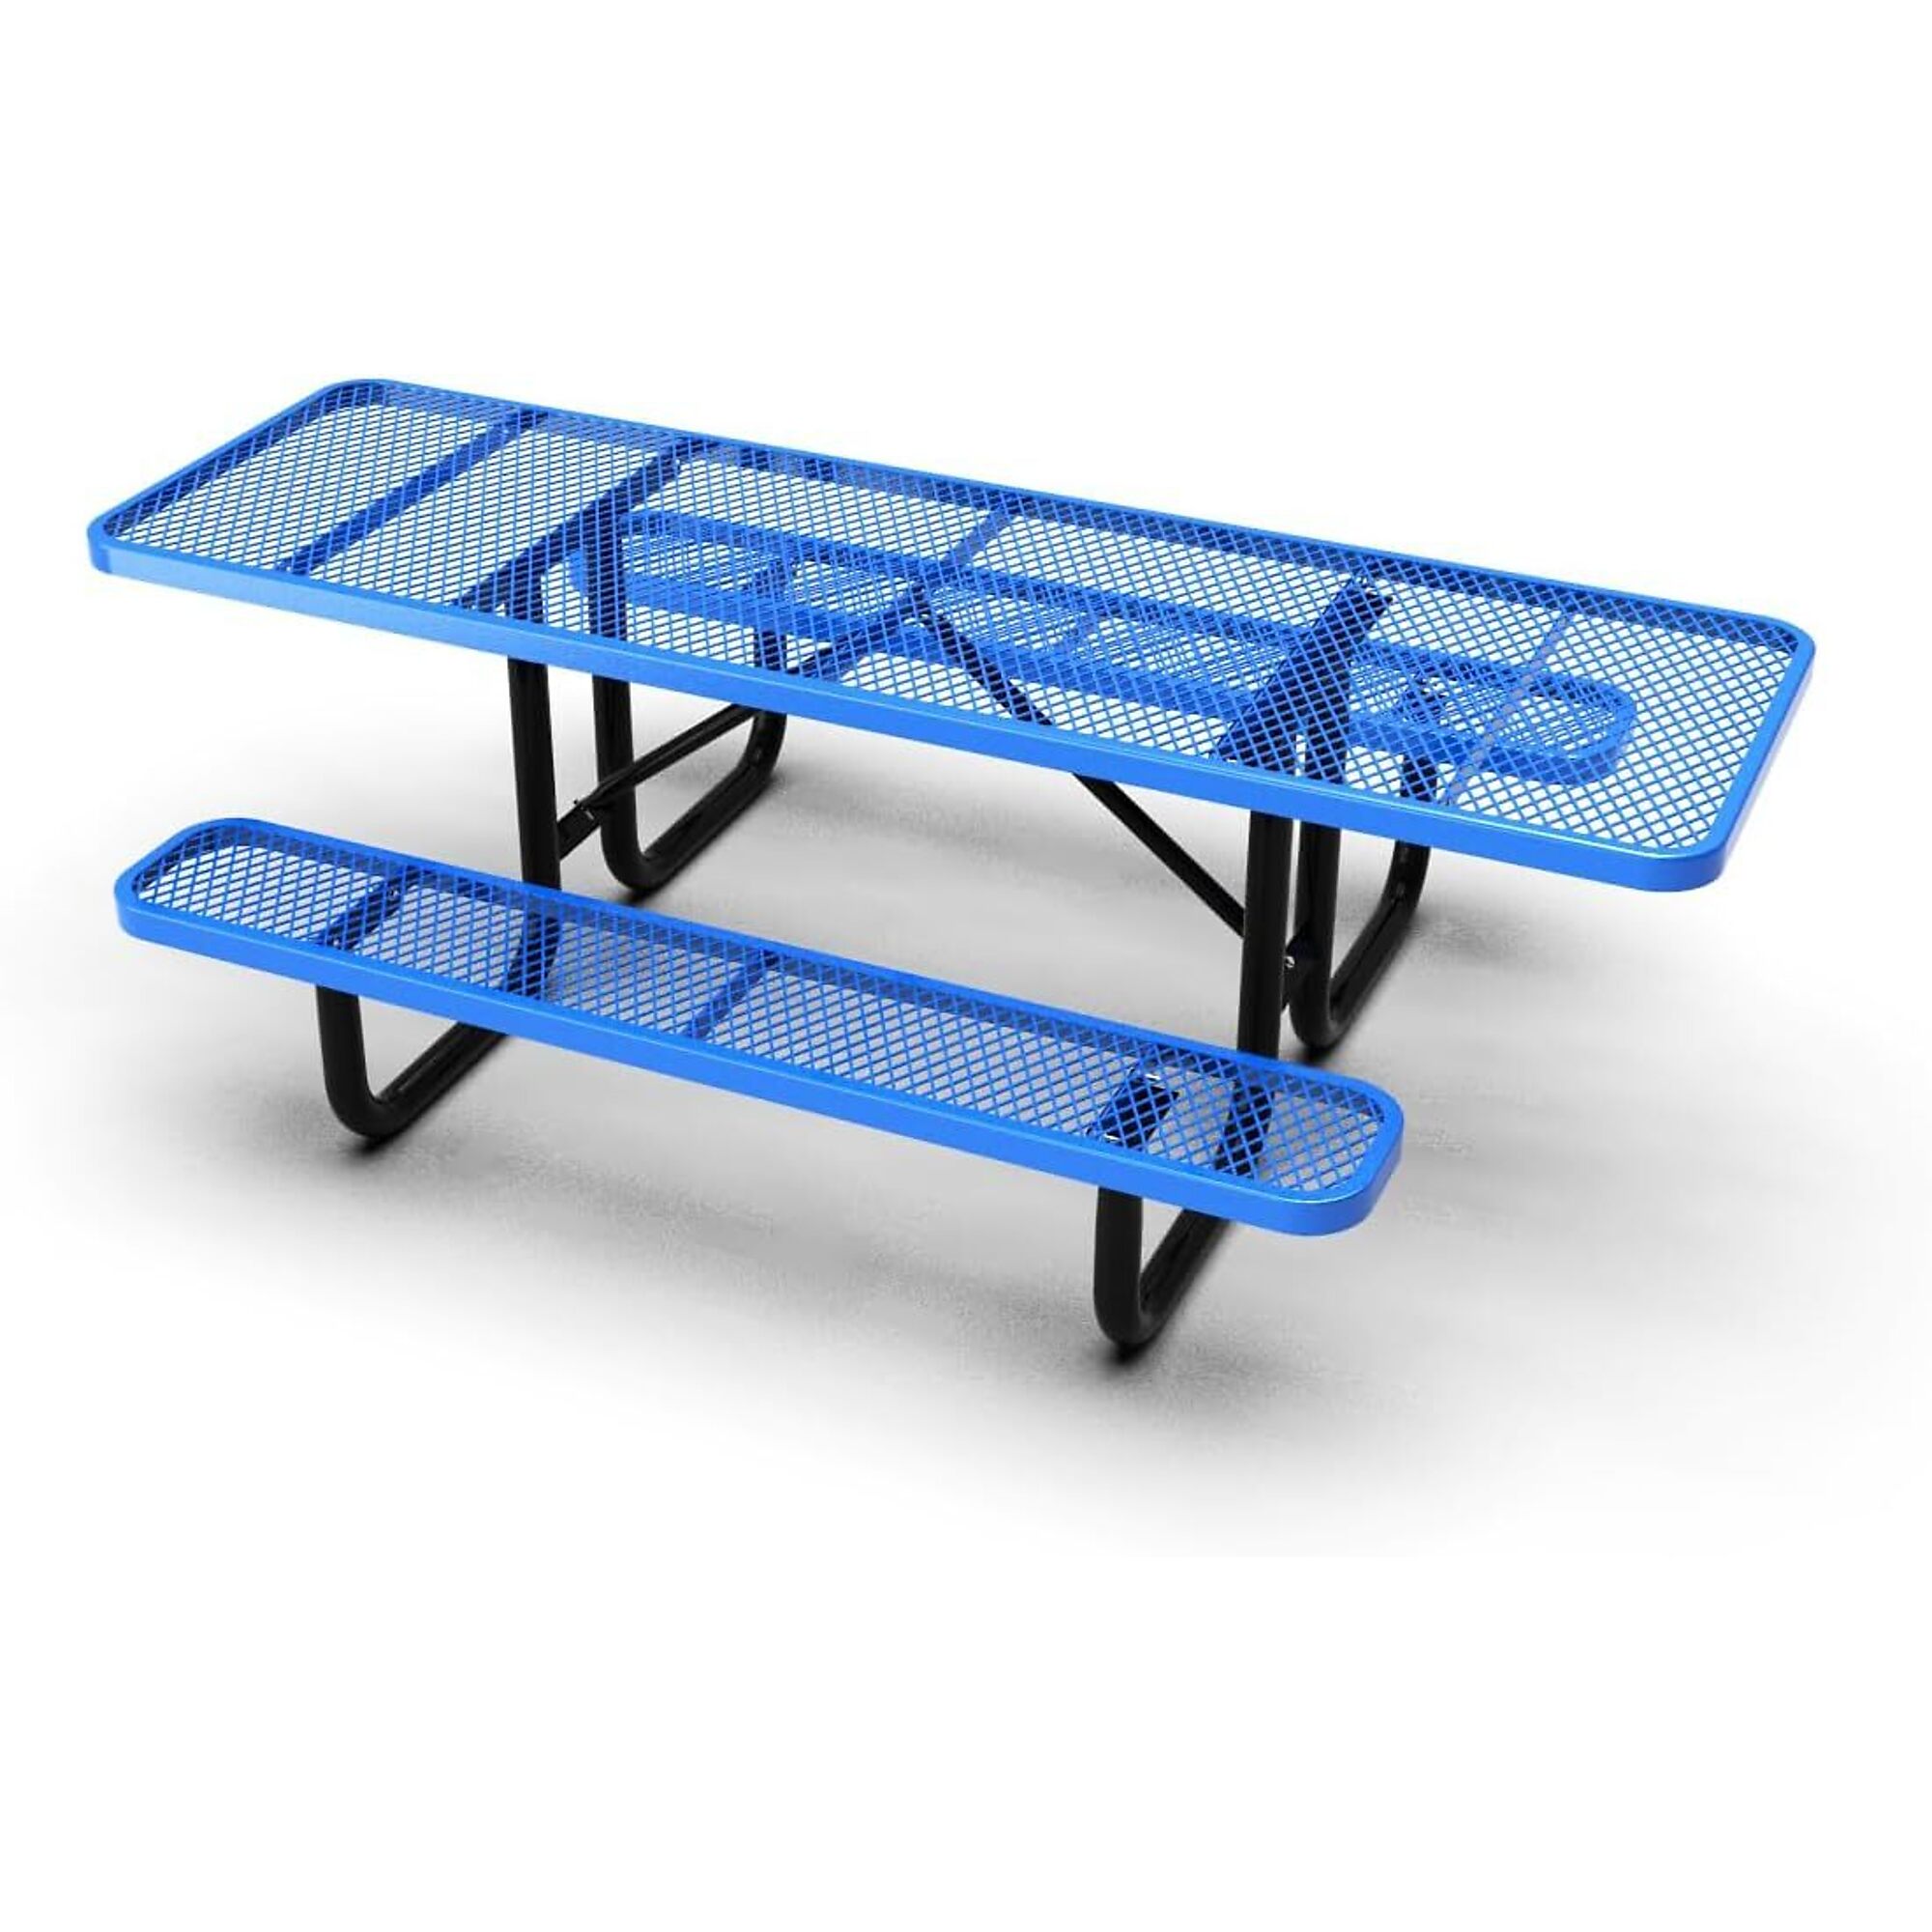 Park Elements, 8ft. thermoplastic coated commercial picnic table, Table Shape Rectangle, Primary Color Blue, Height 30 in, Model CDA-96PT-BLU